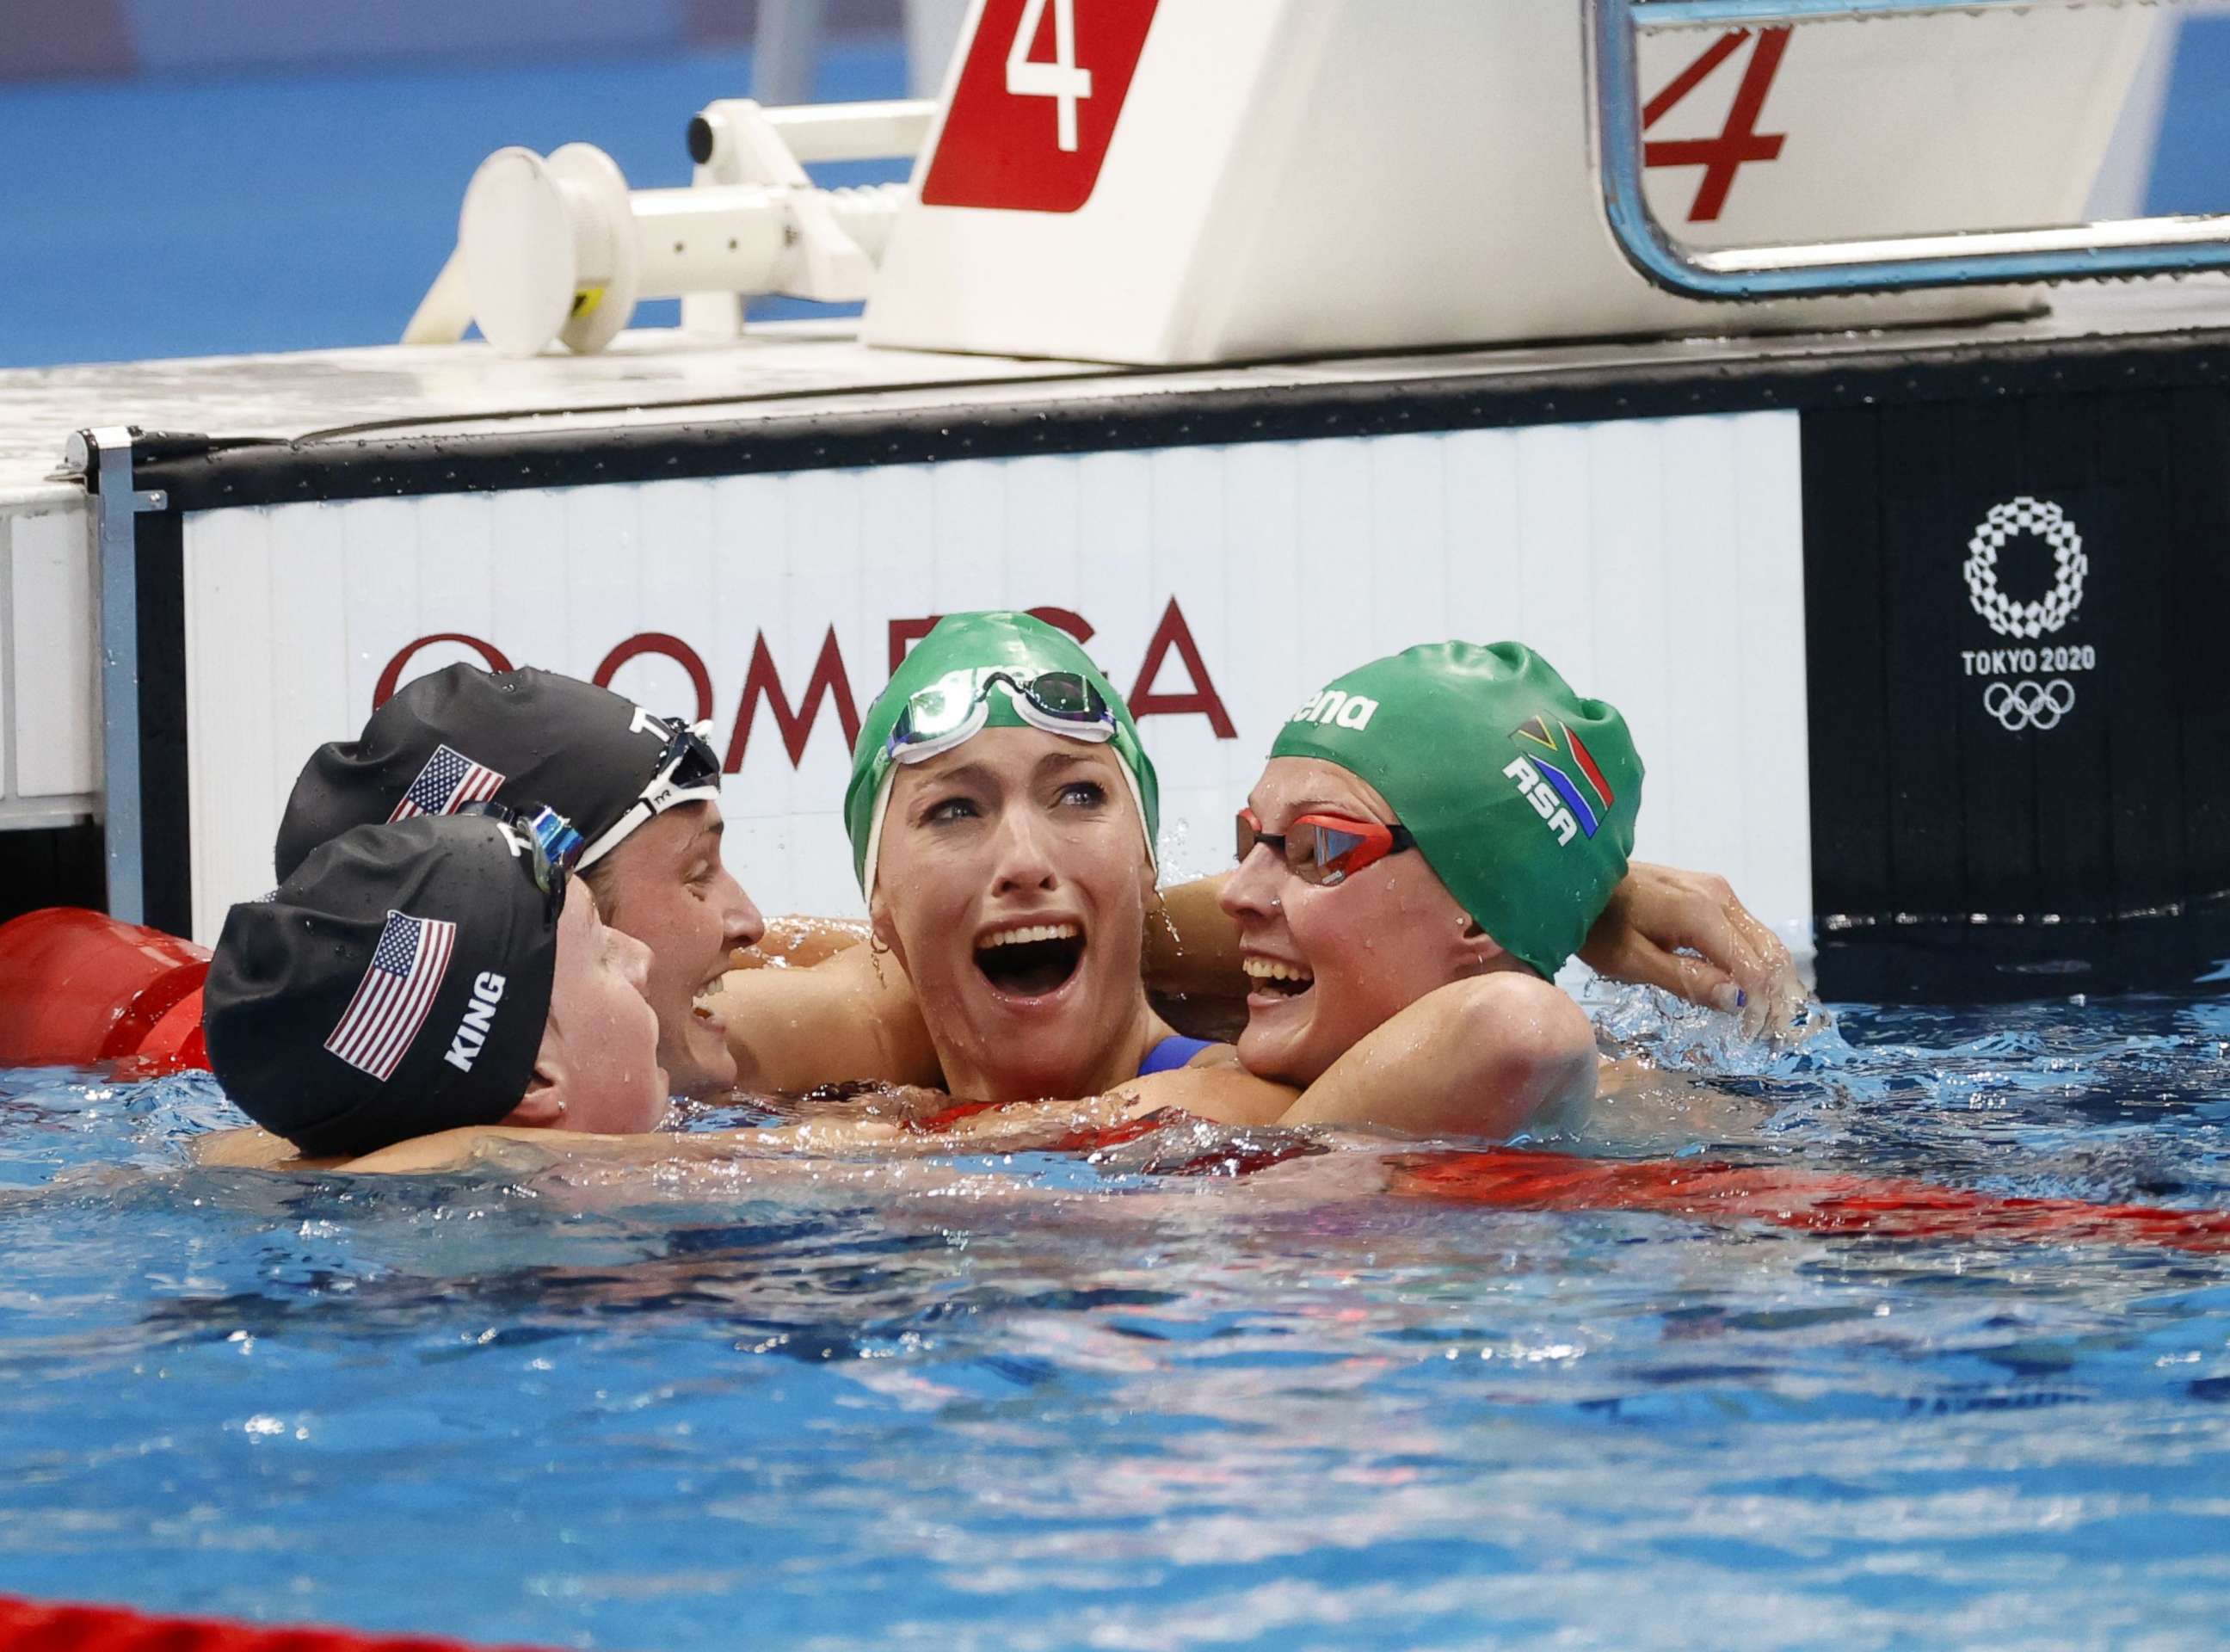 PHOTO: Tatjana Schoenmaker of South Africa reacts after her world record time in the women's 200m breastroke Final as she is congratulated by Lilly King, Annie Lazor, and Kaylene Corbett in Tokyo, Japan, July 30, 2021.